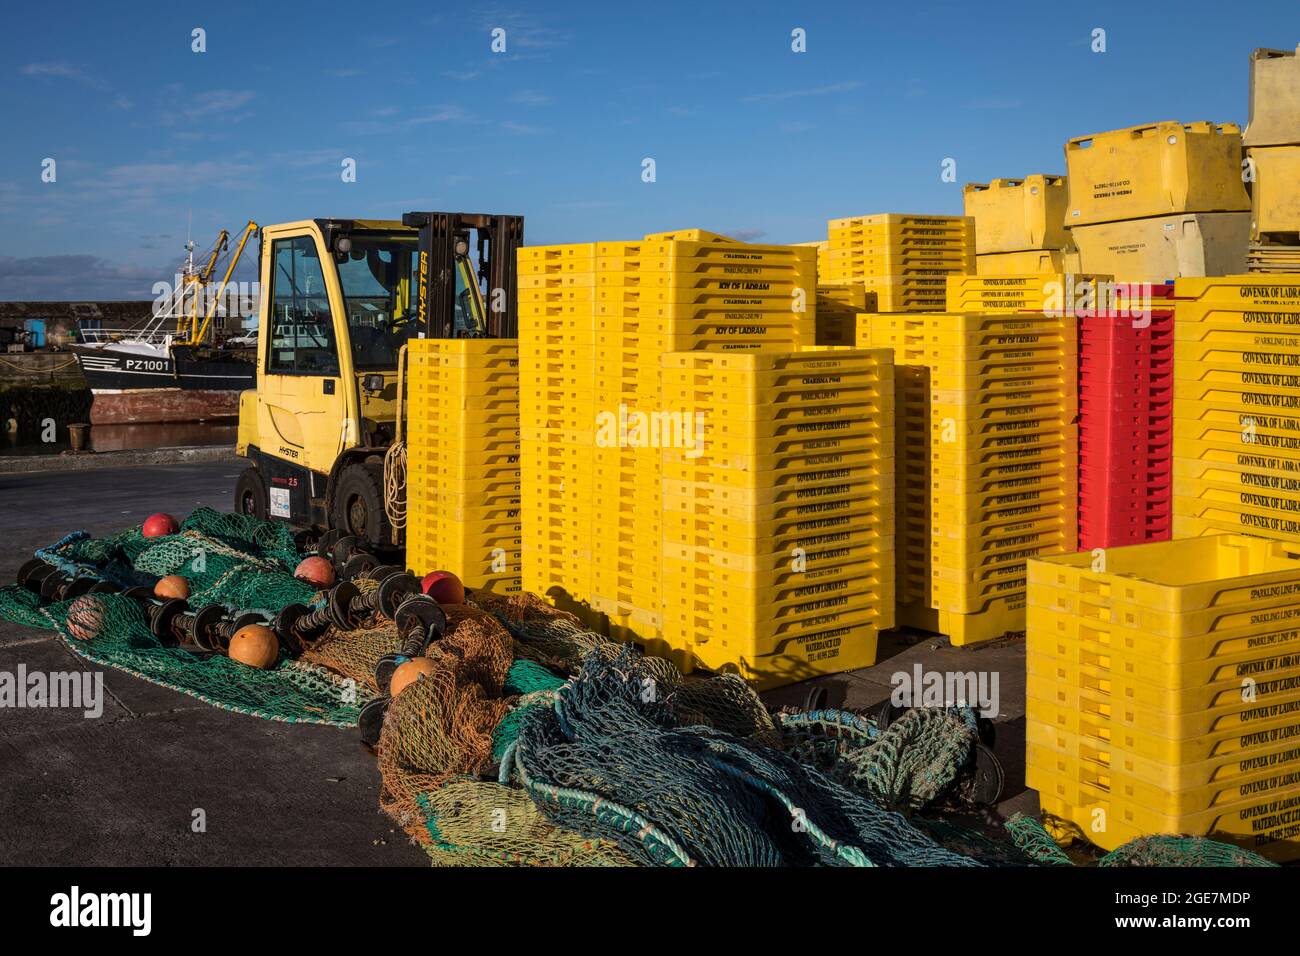 Stacks of bright yellow plastic fish crates and nets on the dockside in Newlyn harbour, Cornwall, England. Stock Photo